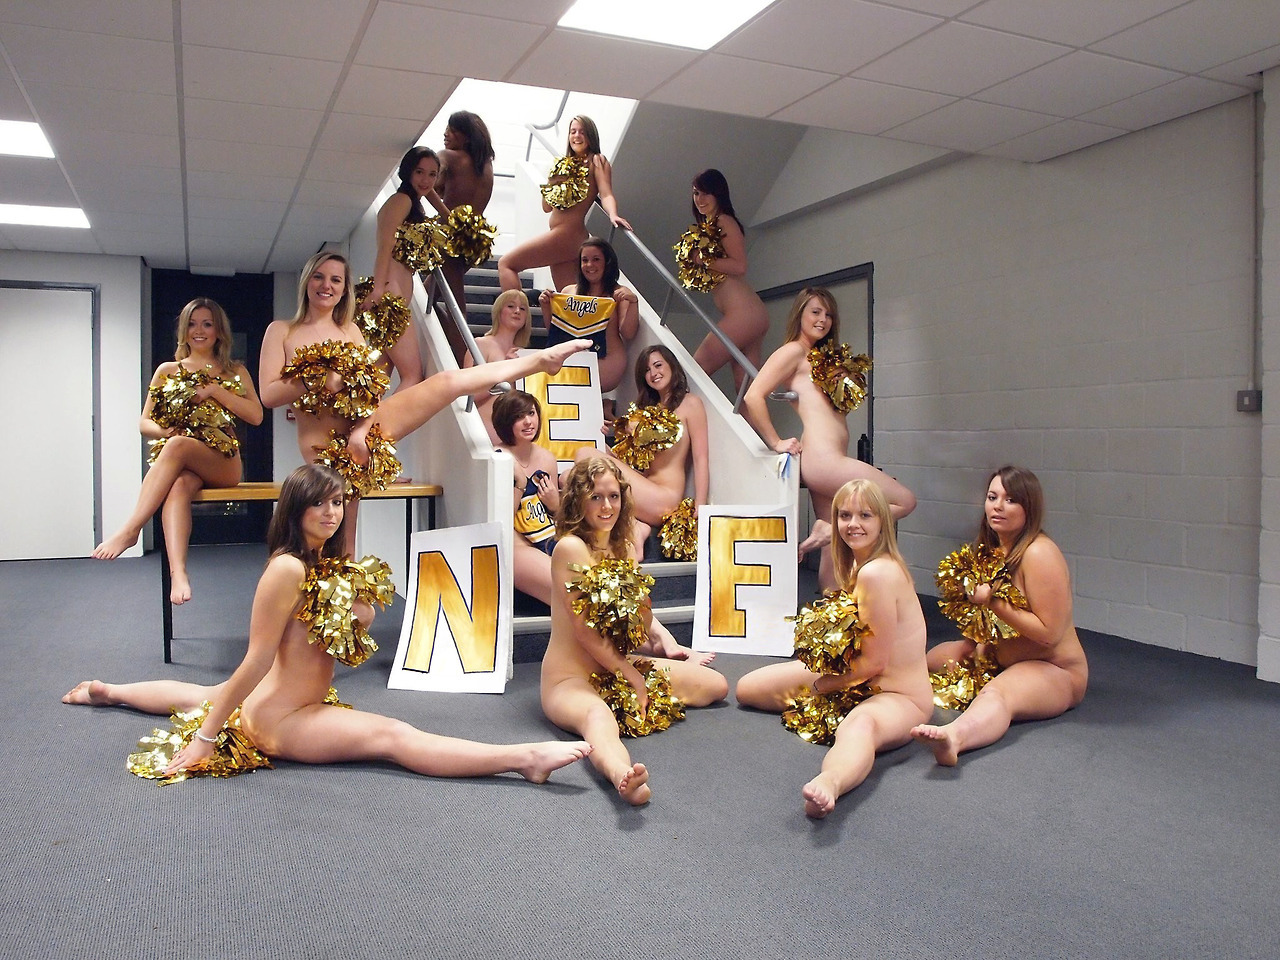 nakedenfcaptions:After the cheerleaders lost the bet, they had to pose for the yearbook